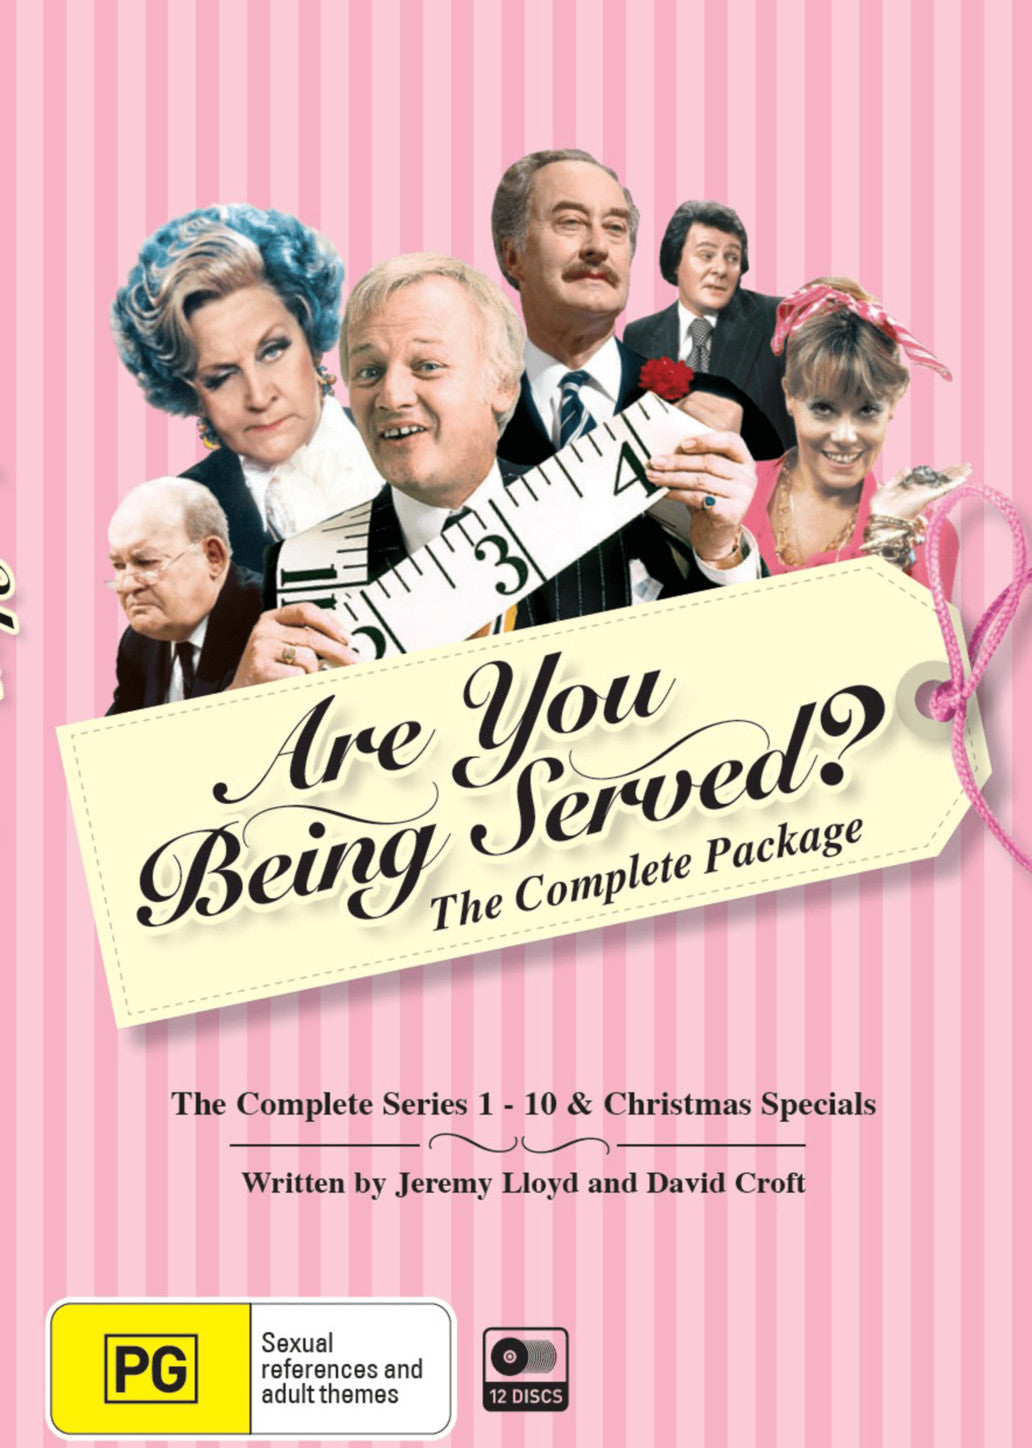 ARE YOU BEING SERVED: THE COMPLETE PACKAGE